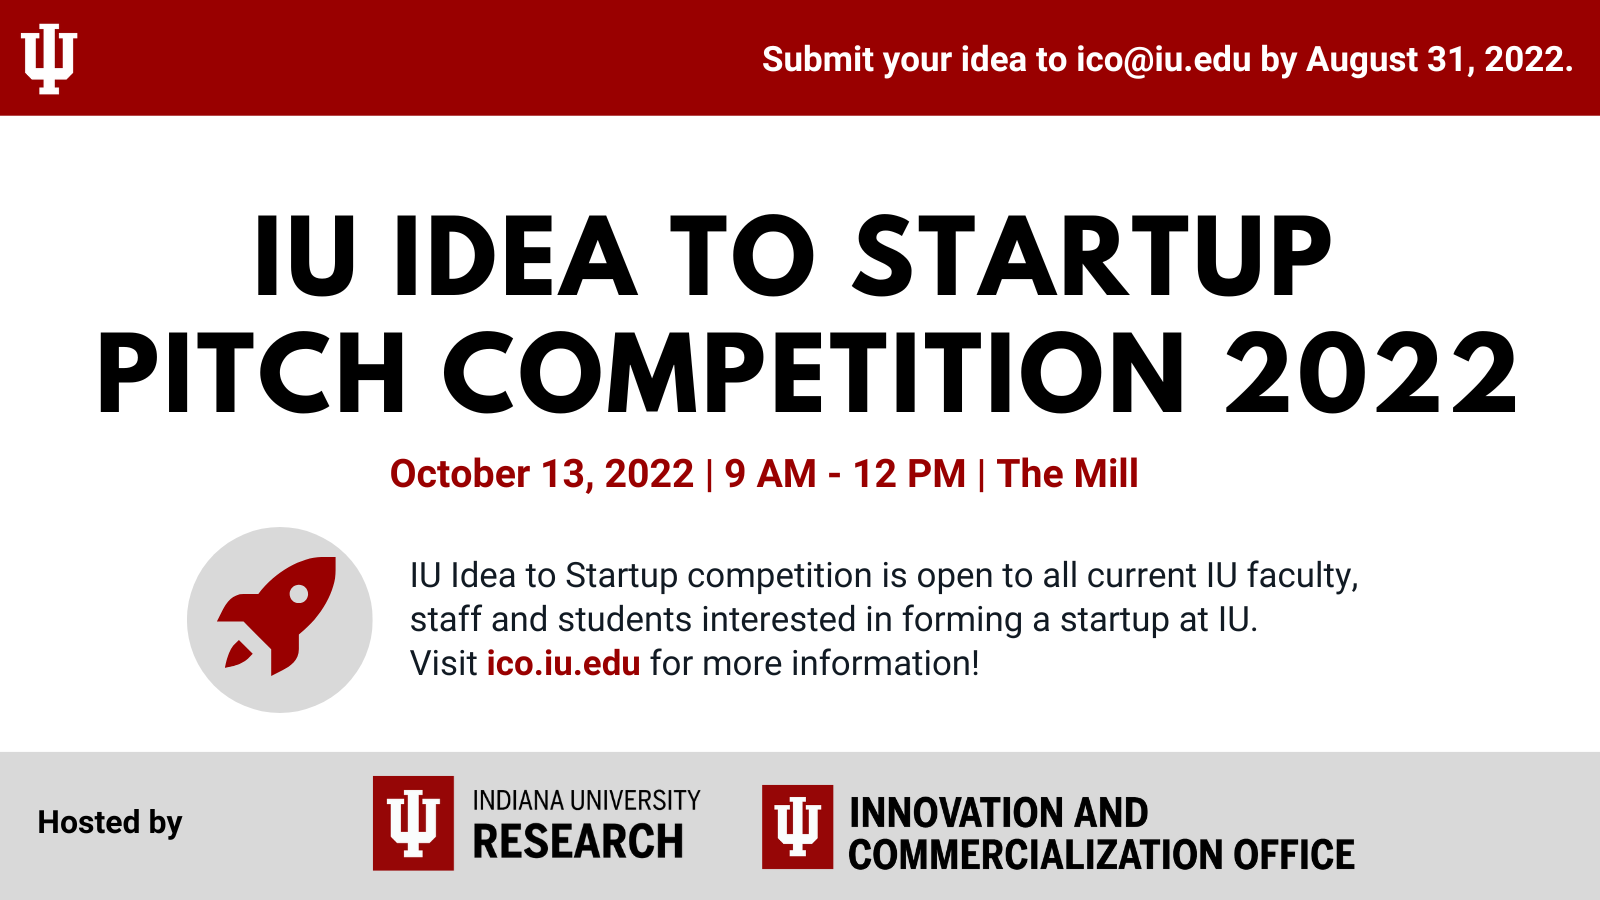 IU-Idea-to-Startup-image.png